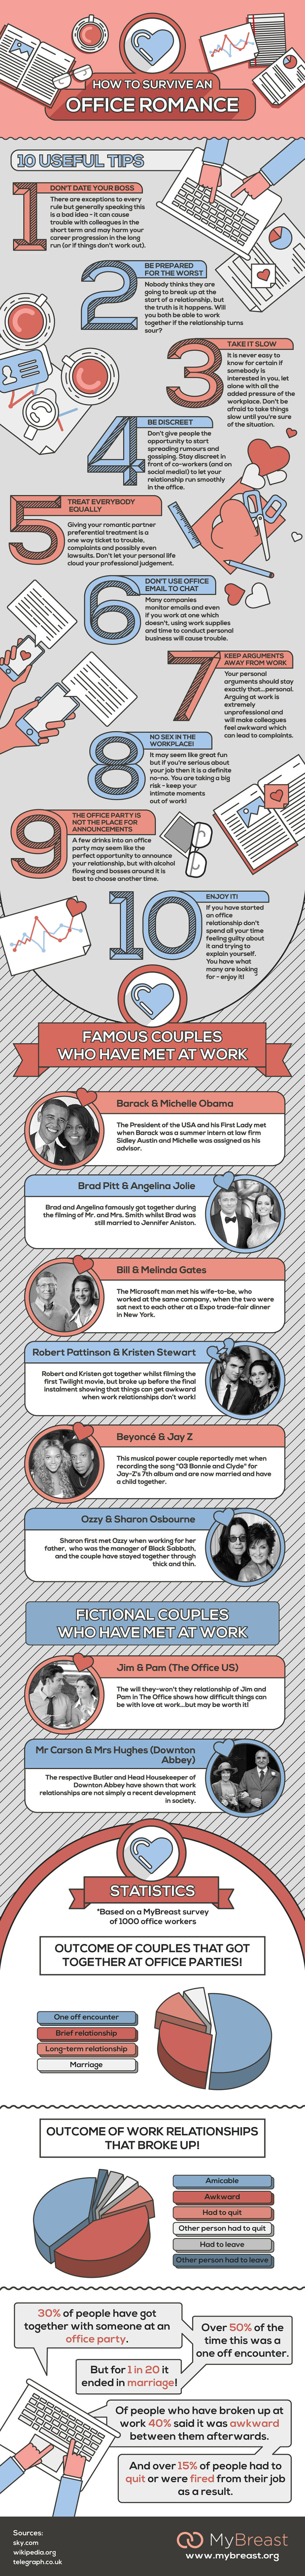 10 Rules for Dating Coworkers Infographic